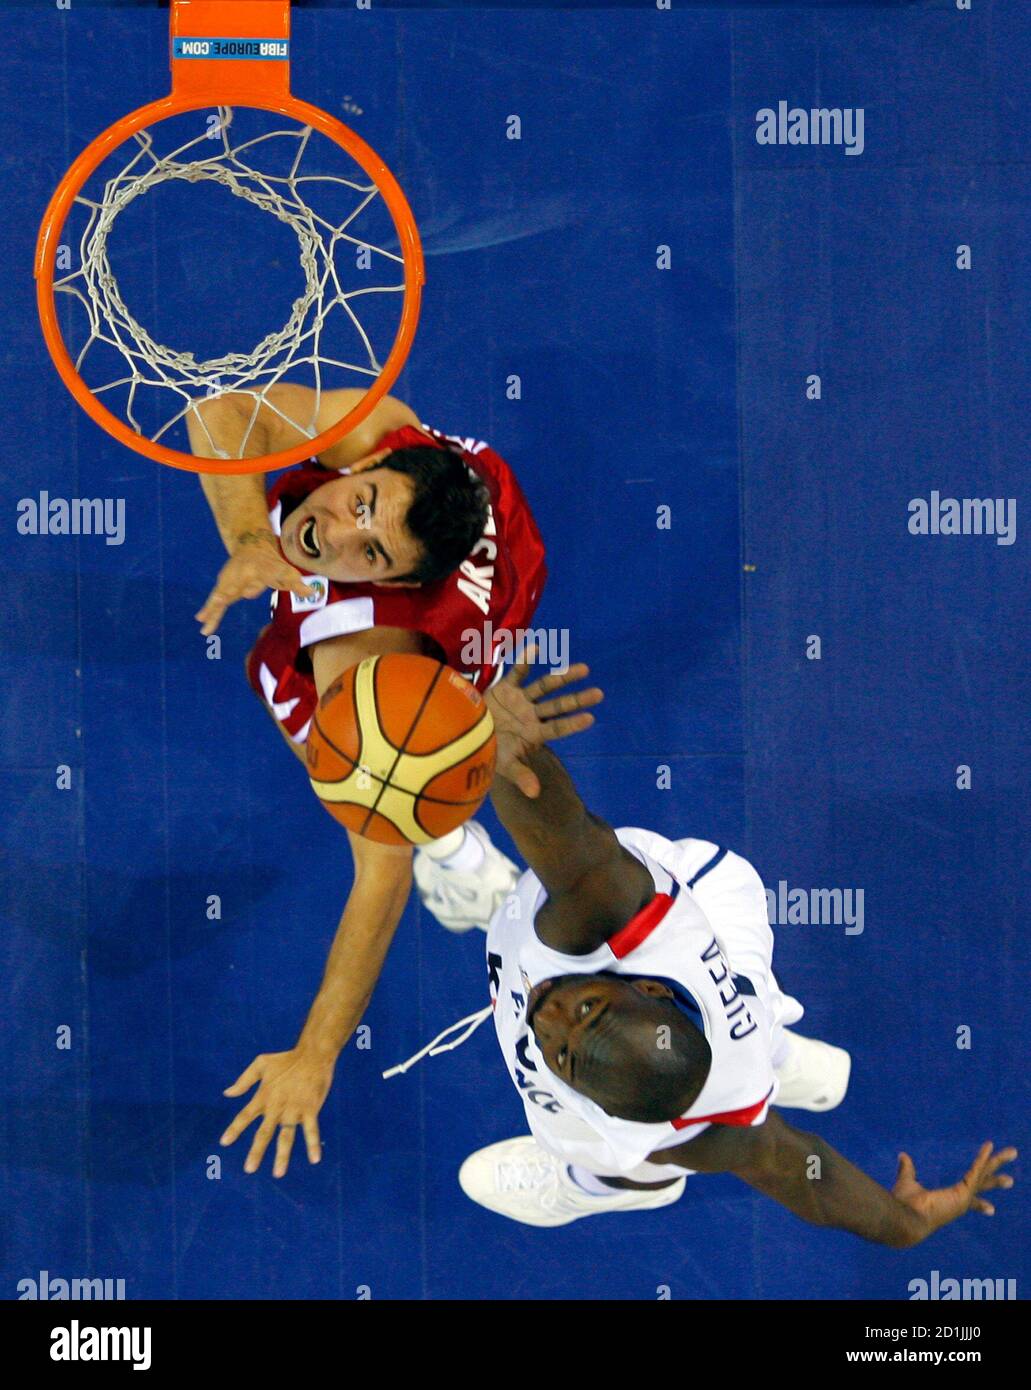 Turkey's Ender Arslan (L) and France's Sacha Giffa fight for a rebound during their second round game at the European Basketball Championships in Madrid September 12, 2007. REUTERS/Victor Fraile (SPAIN) Stock Photo